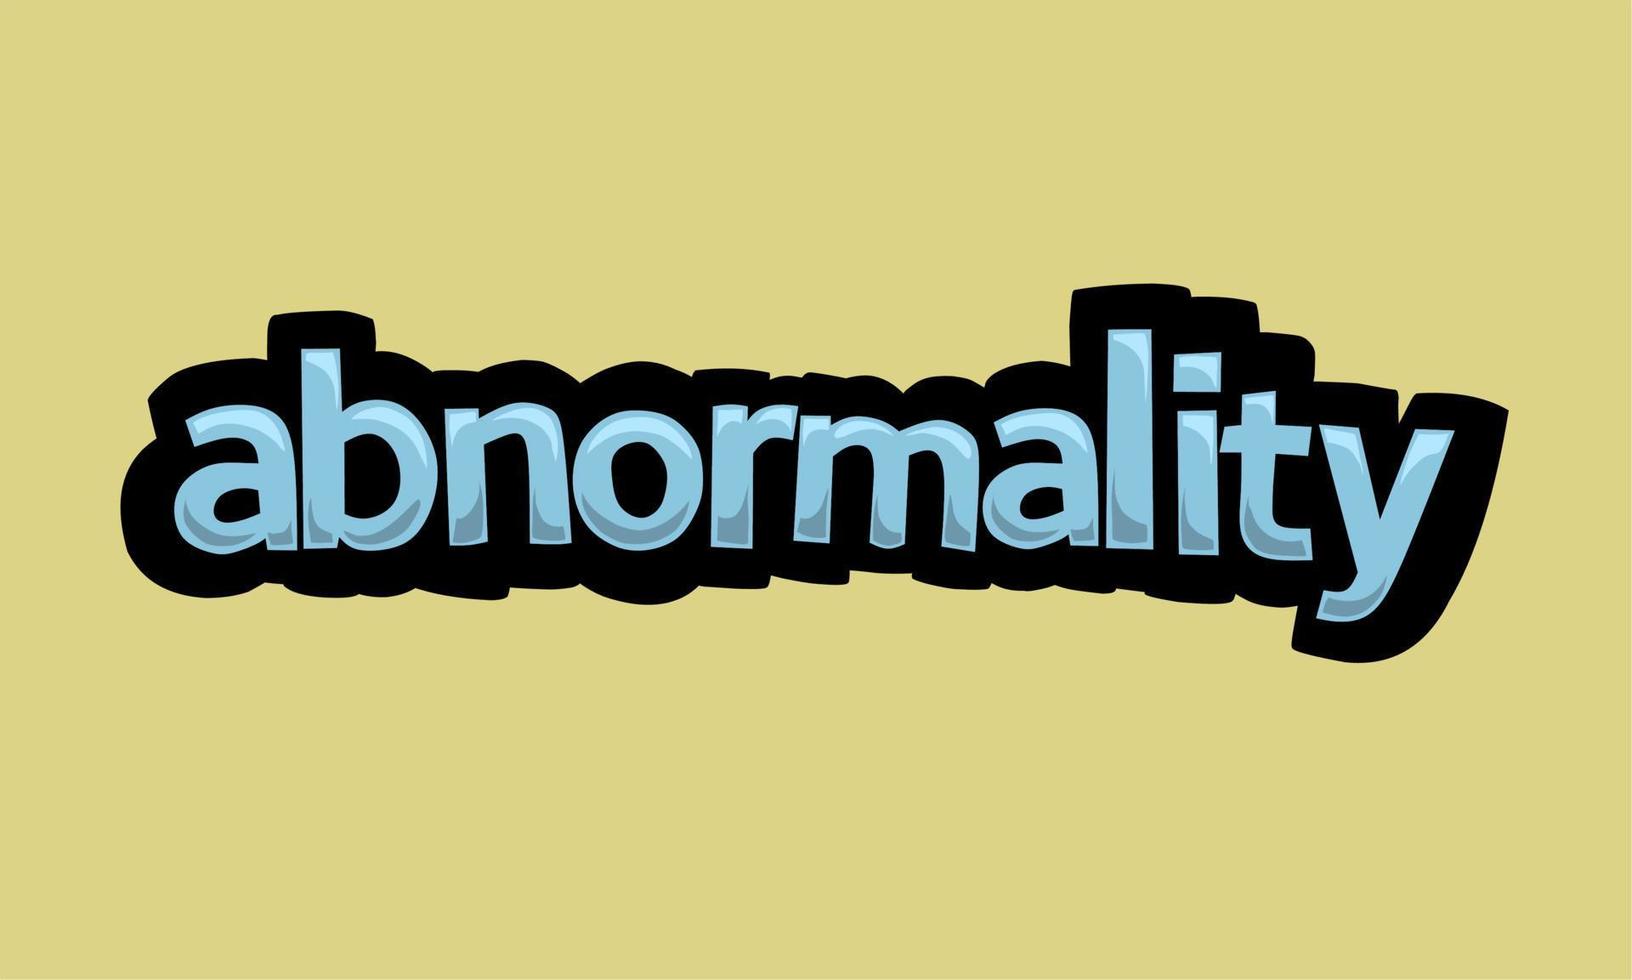 ABNORMALITY writing vector design on a yellow background